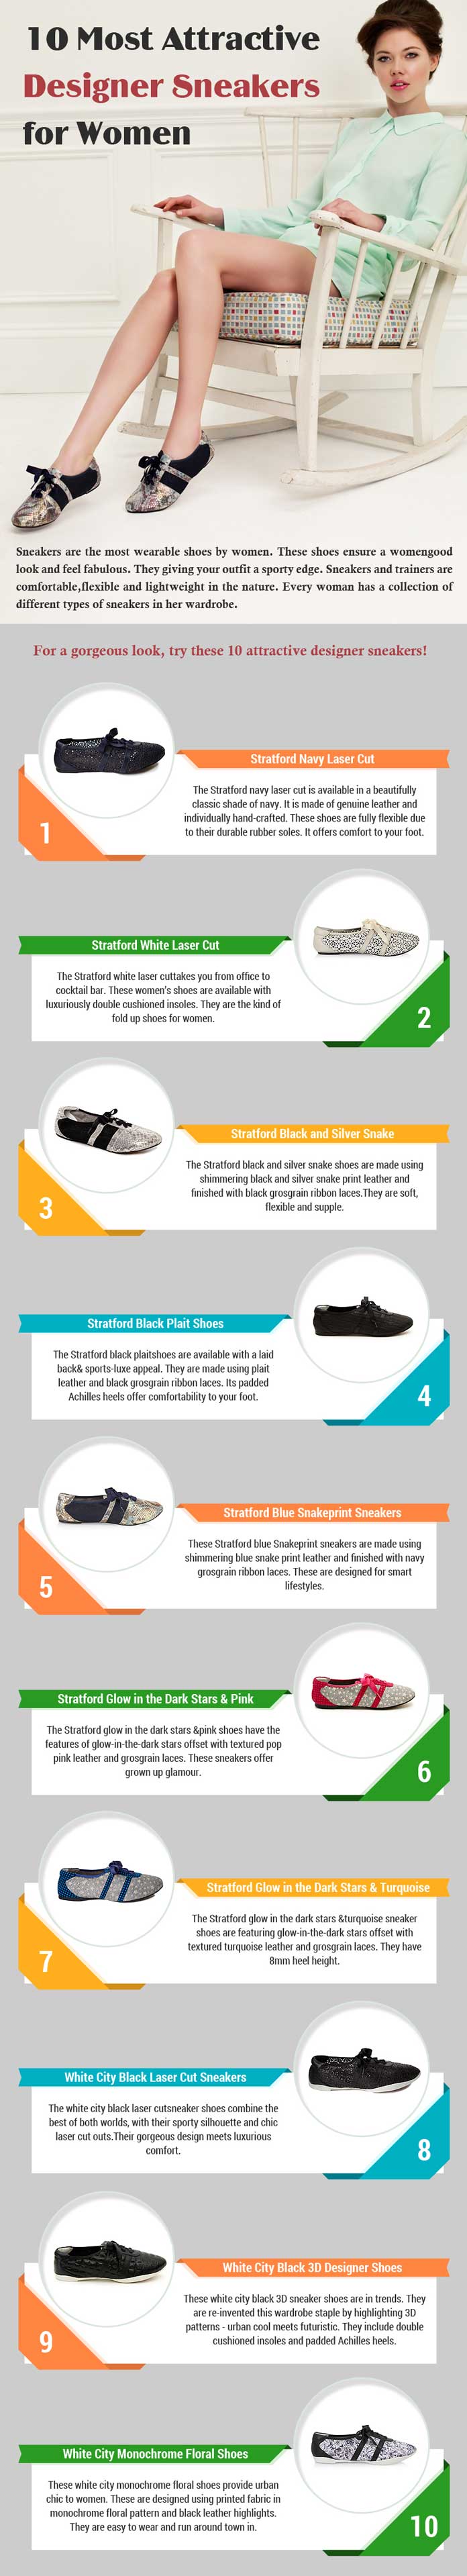 10 Most Attractive Designer Sneakers for Women [Infographic]